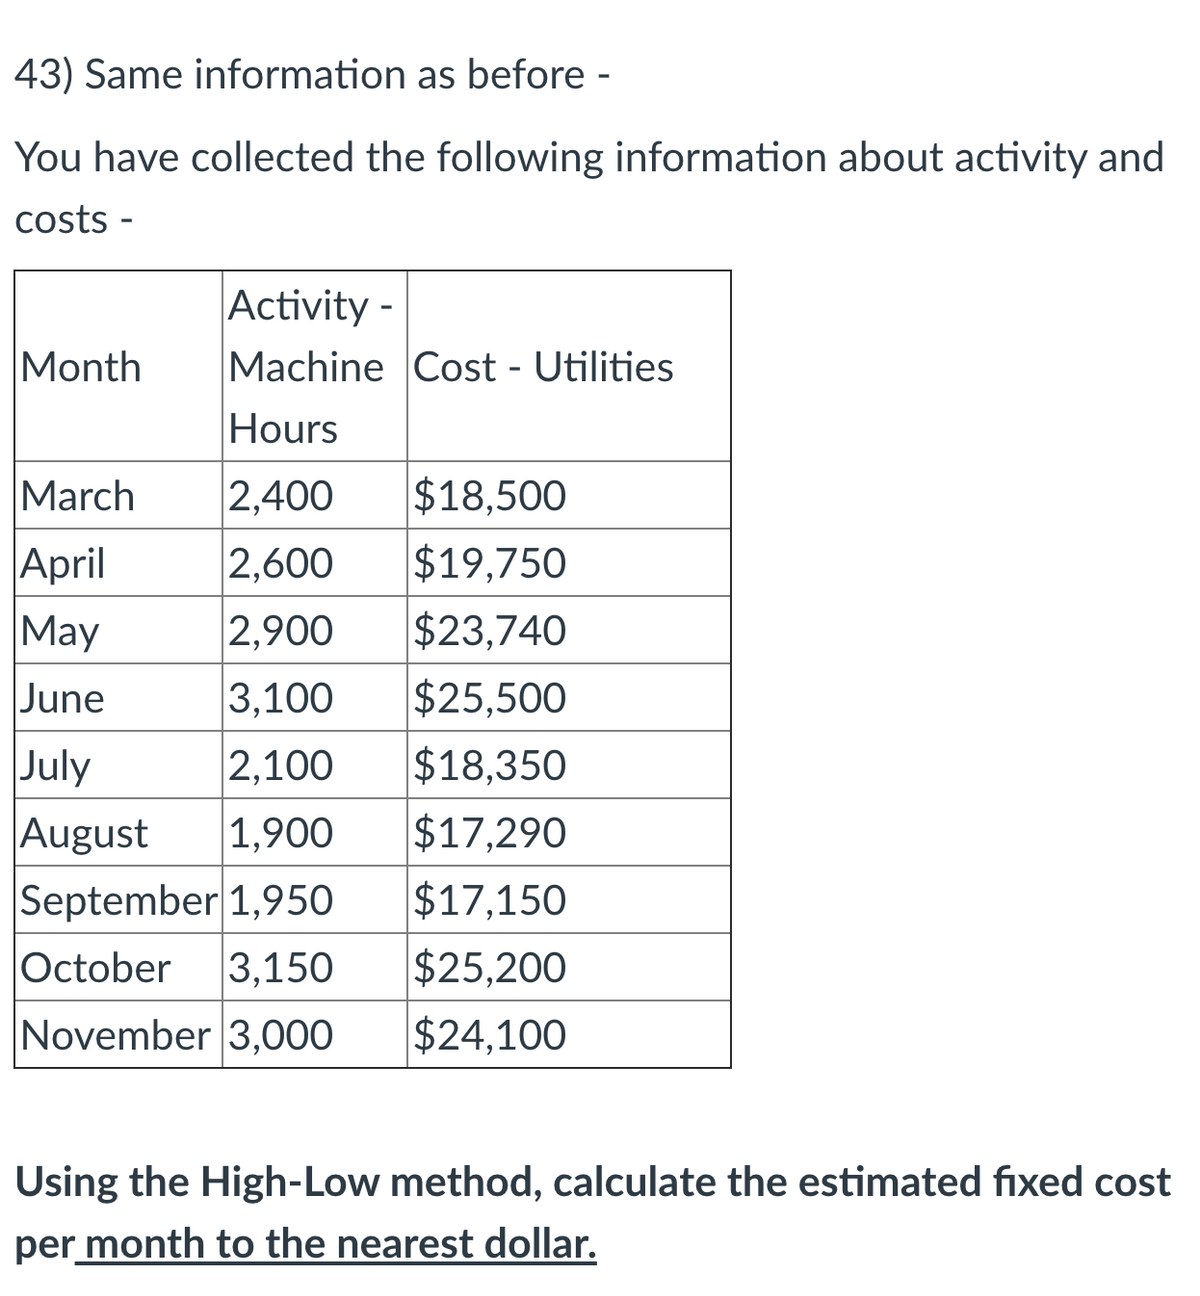 43) Same information as before -
You have collected the following information about activity and
costs -
Activity -
Machine Cost - Utilities
Month
Hours
March
2,400
$18,500
April
May
$19,750
$23,740
$25,500
2,600
2,900
3,100
2,100
June
$18,350
July
August
September 1,950
3,150
$17,290
$17,150
$25,200
1,900
October
November 3,000
$24,100
Using the High-Low method, calculate the estimated fixed cost
per month to the nearest dollar.
